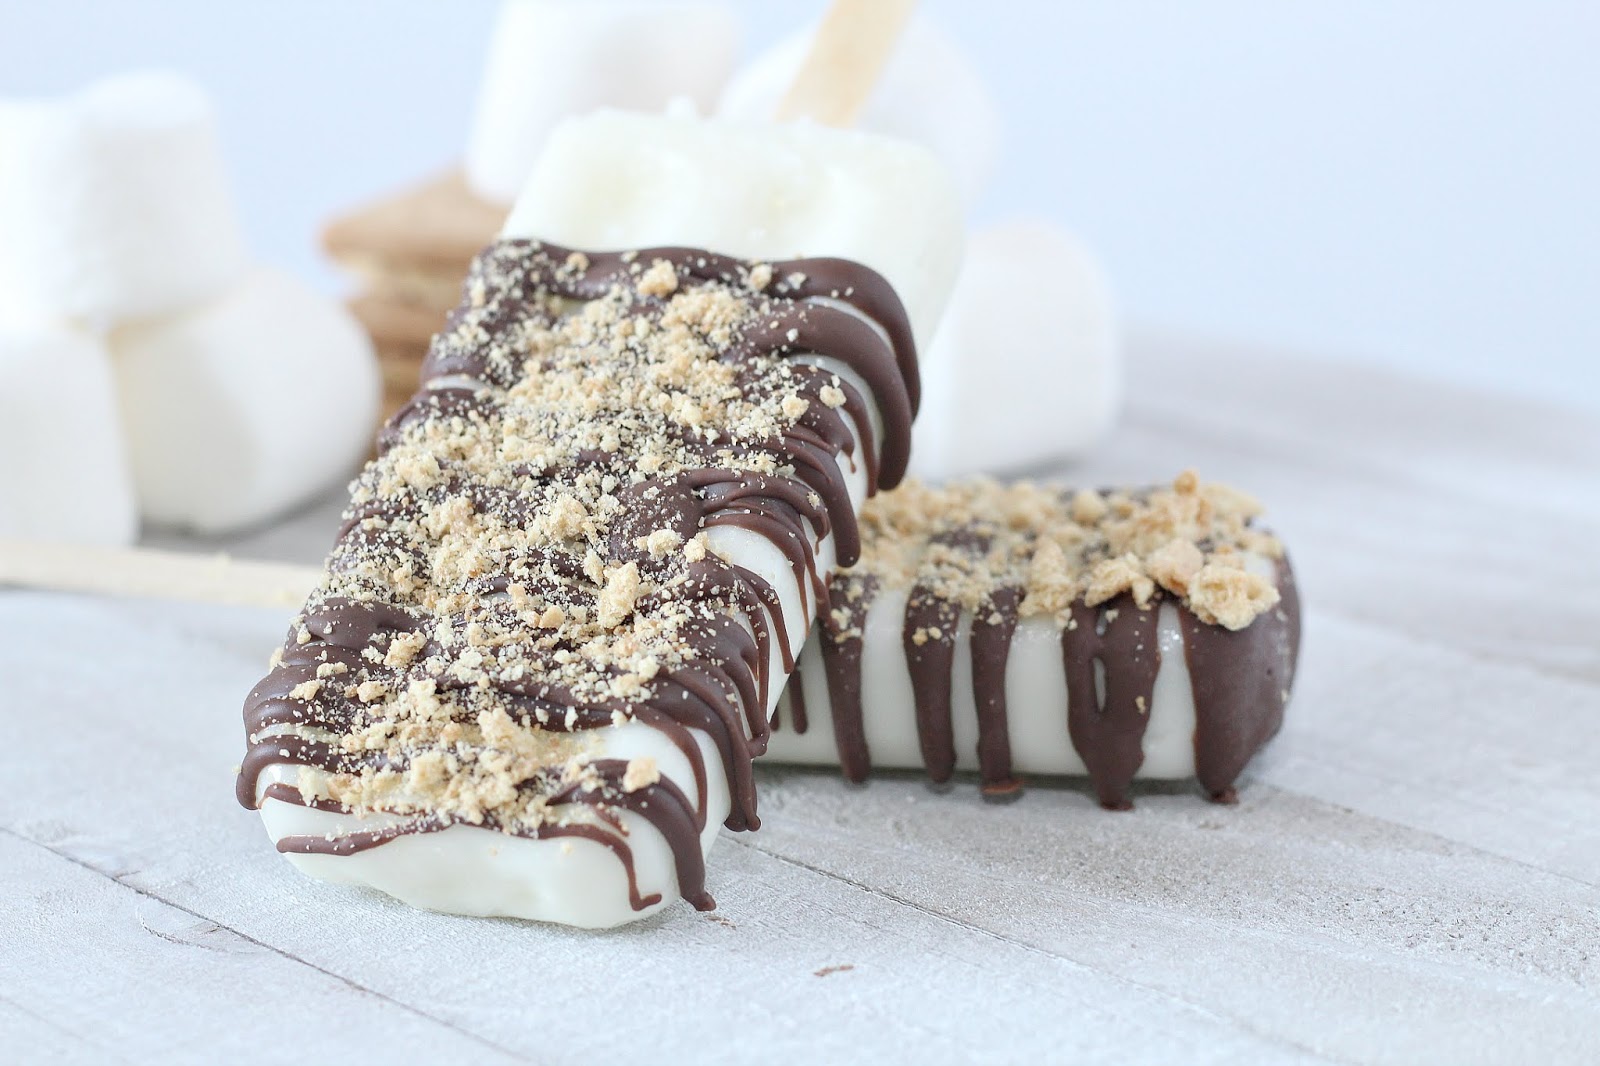 S'more pops homemade with ice cream and without the campfire